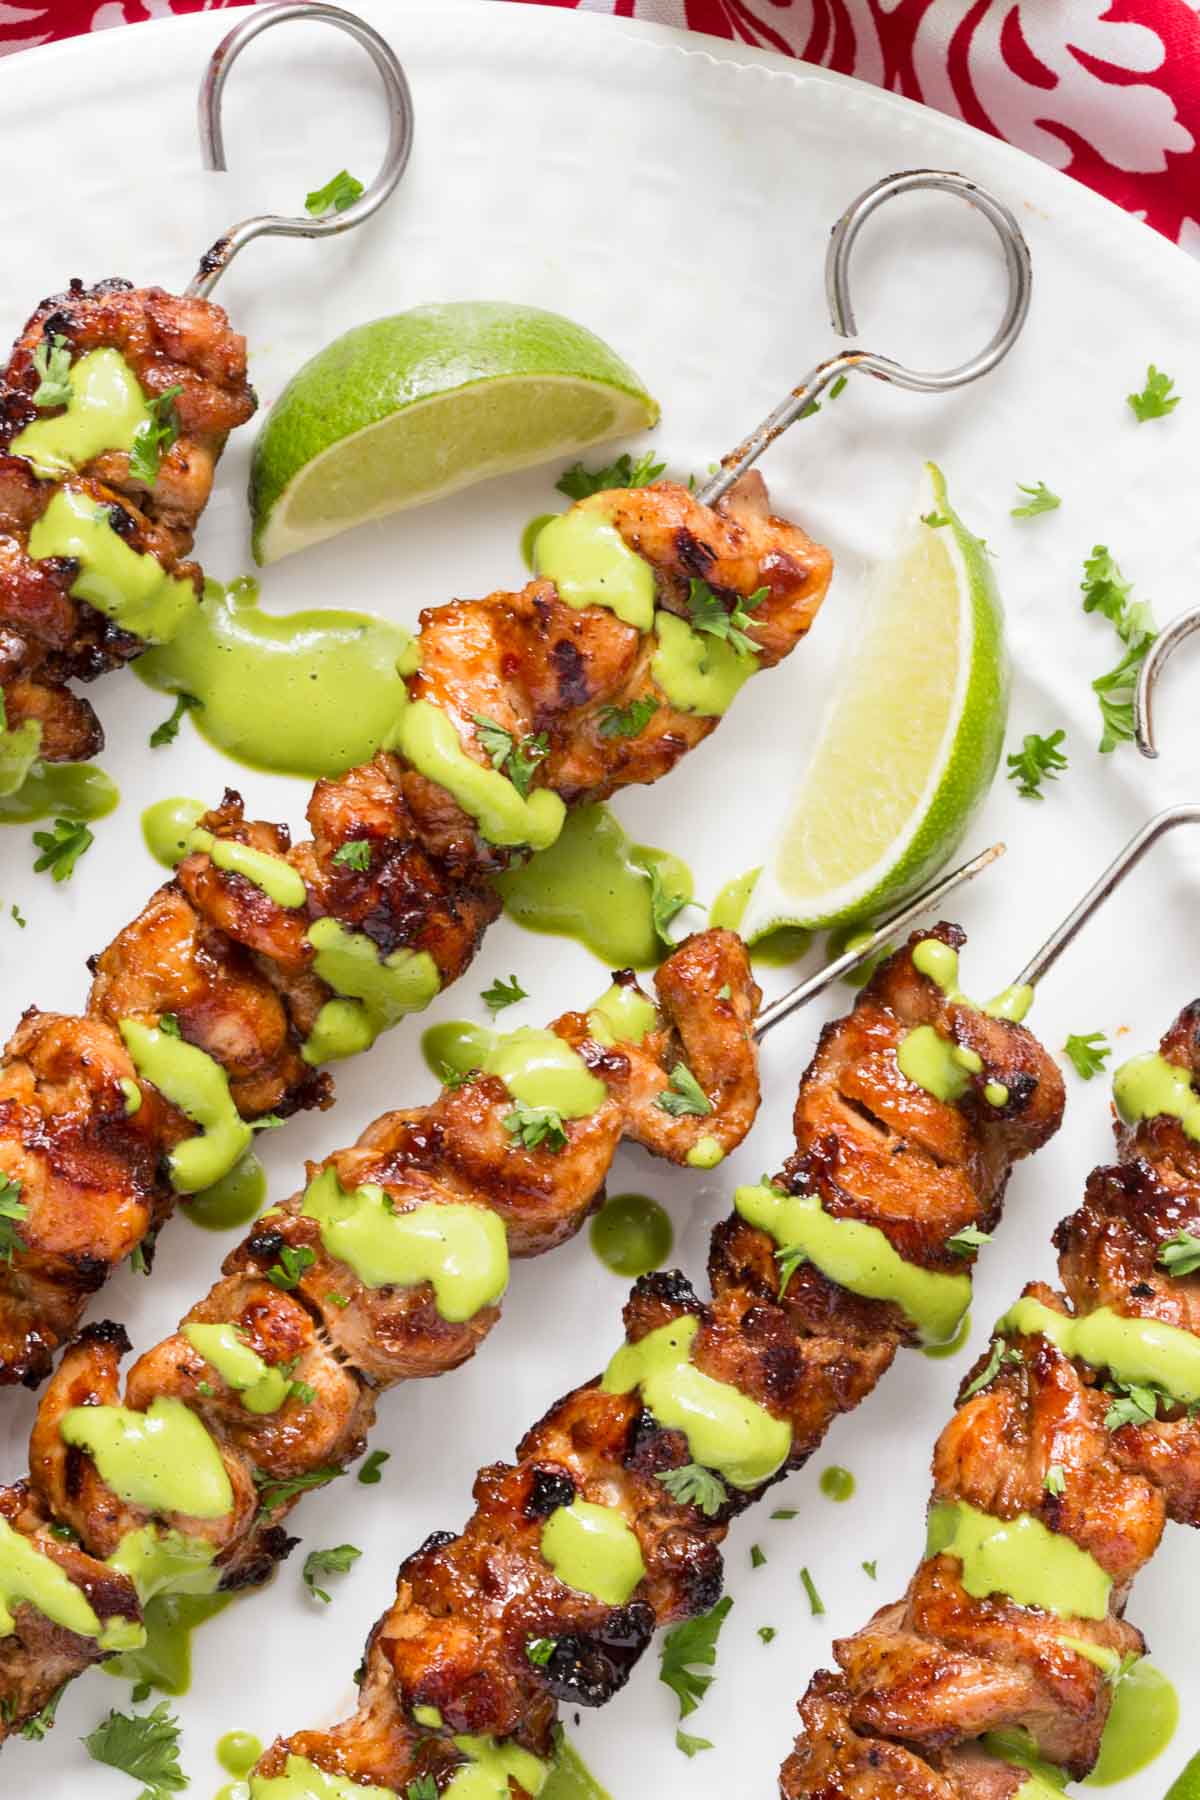 Vertical overhead closeup photo of Peruvian Chicken Skewers with green sauce and garnished with lime wedges and herbs.